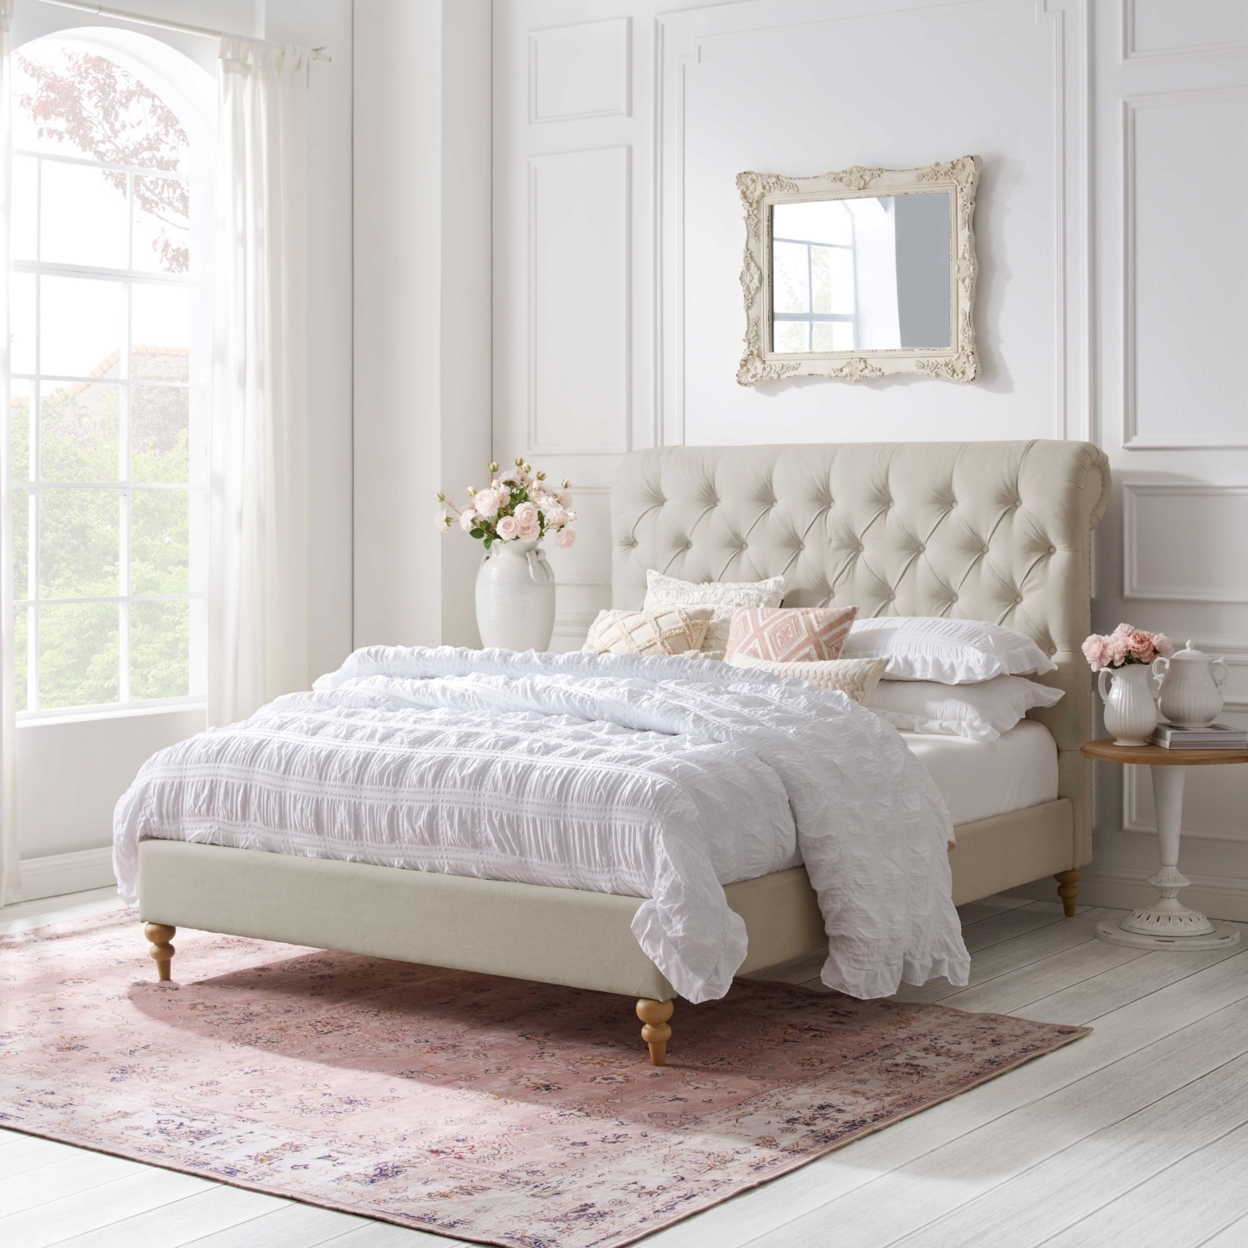 Kailynn Bed-Rolled Top Button Tufted-Nailhead Trim-Slats Included - Cream White, Twin